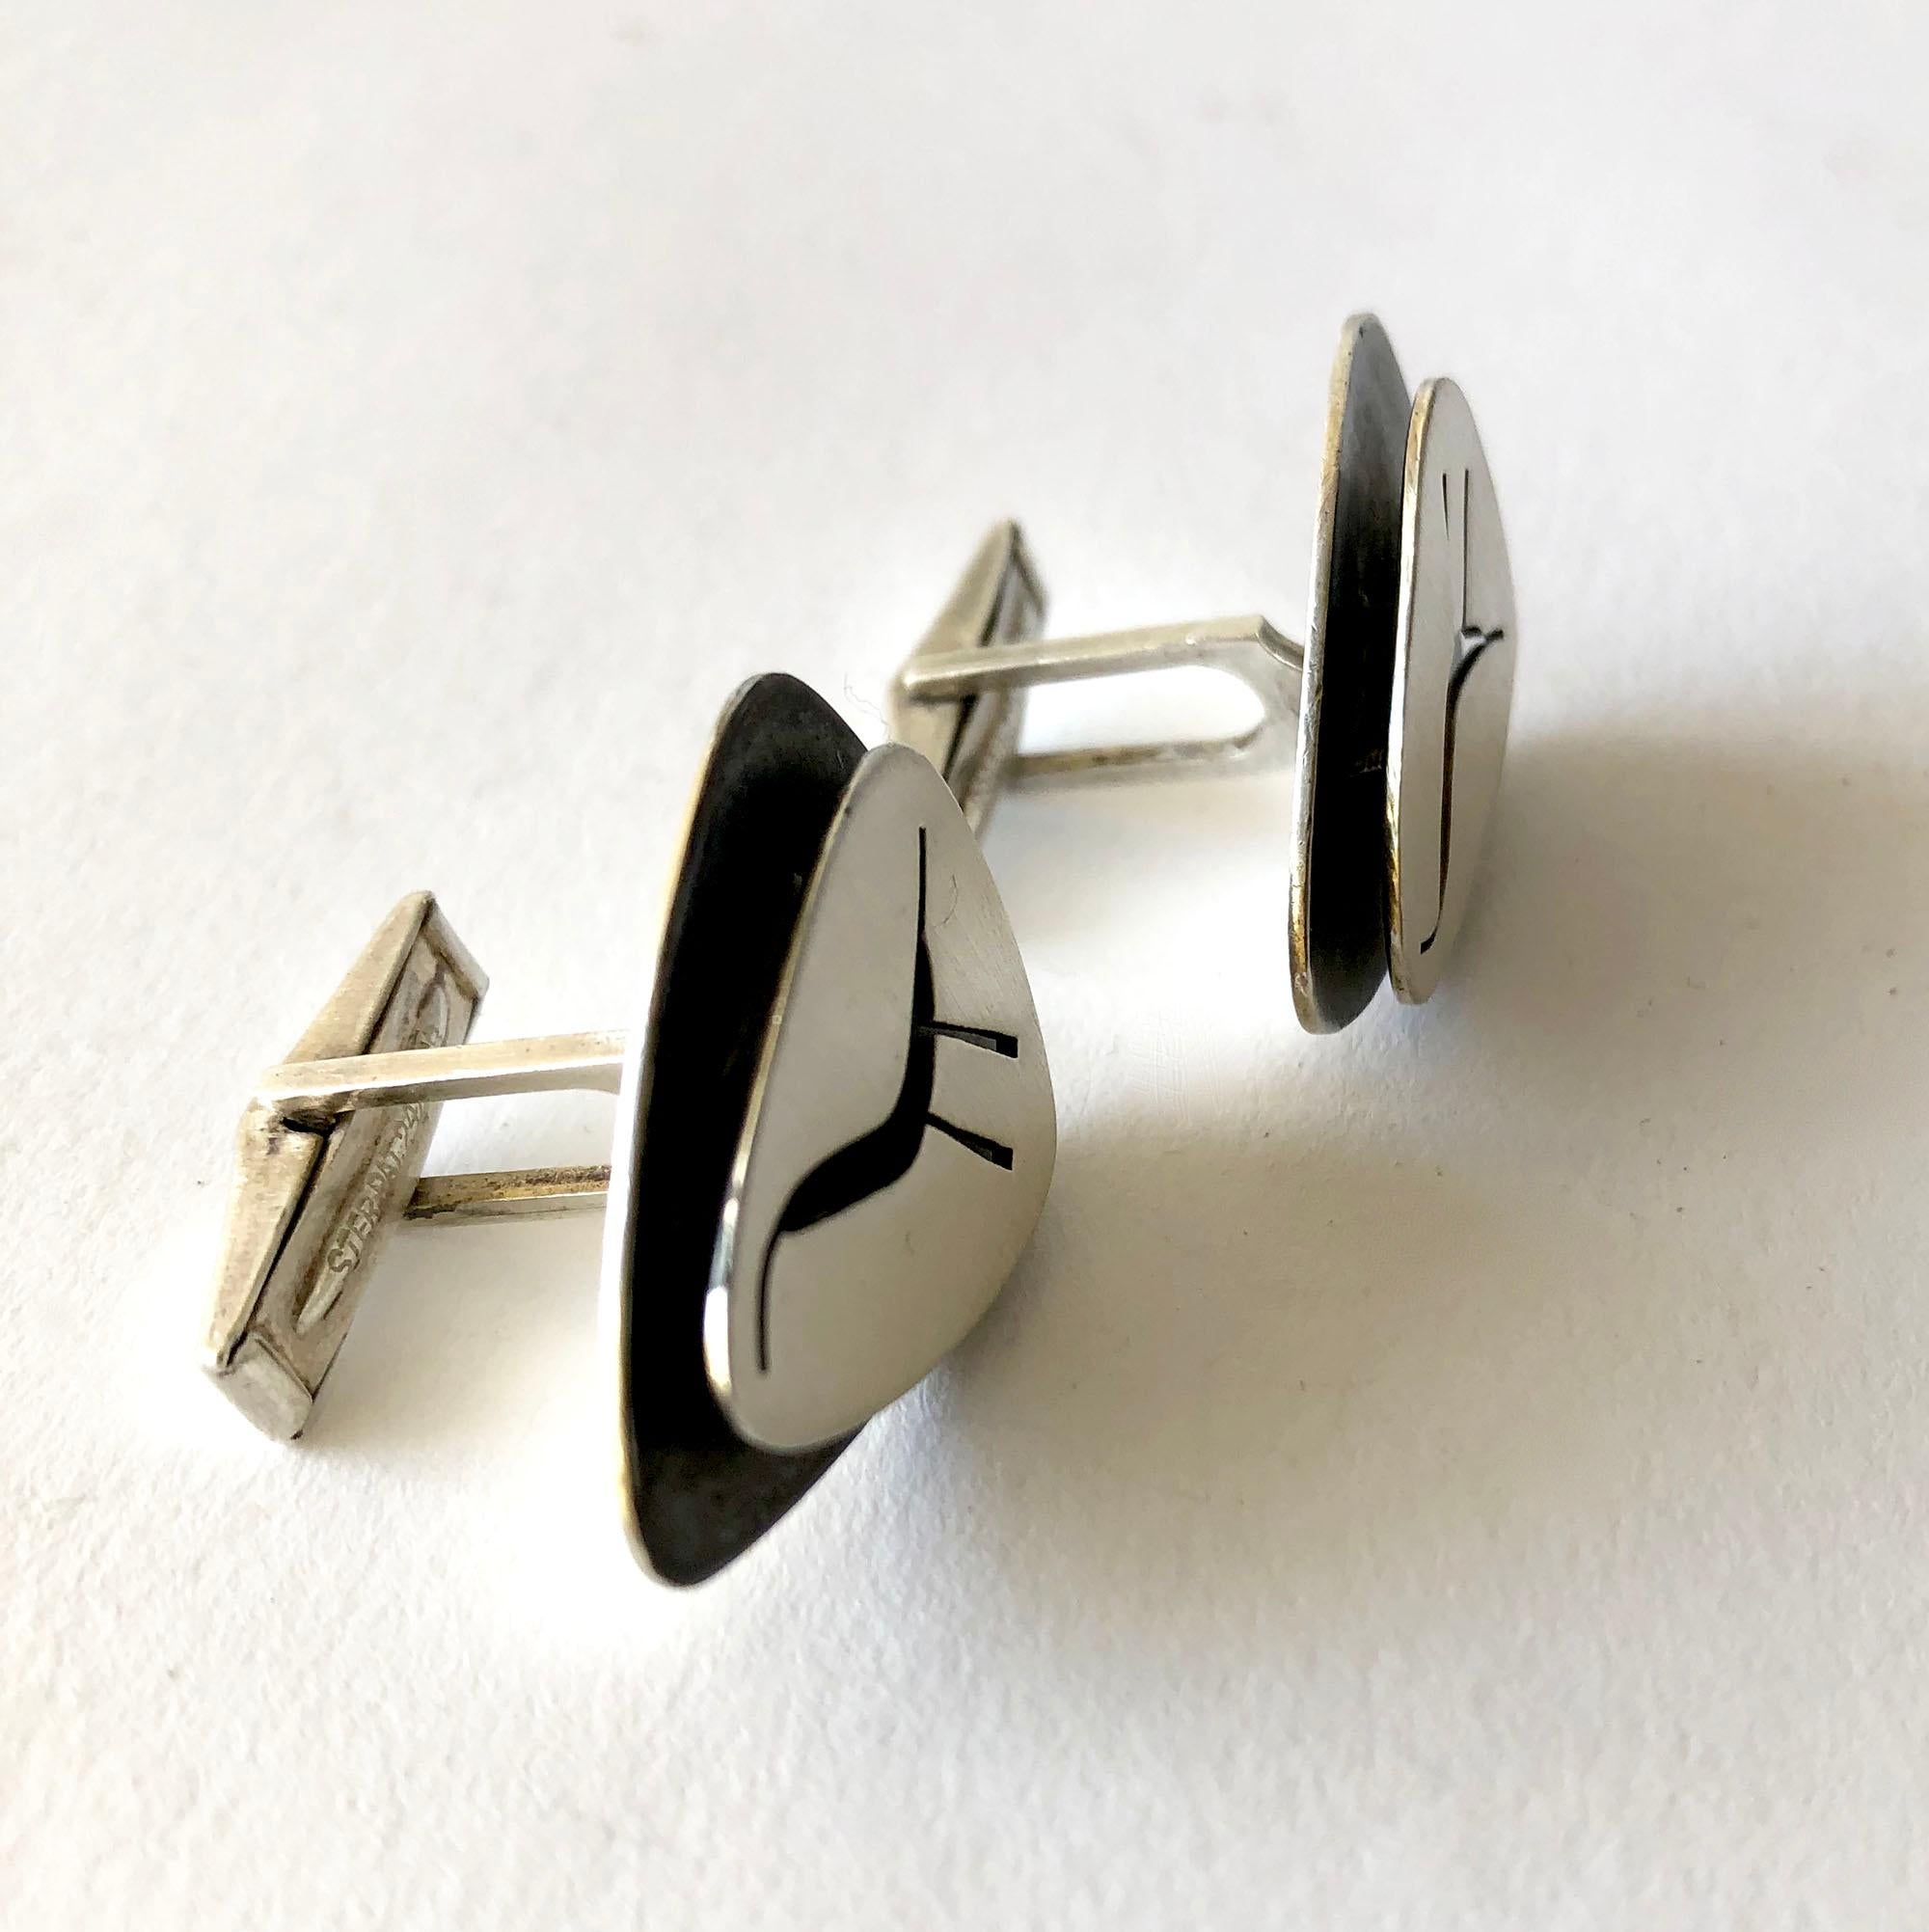 Double layered sterling silver cufflinks with pierced design of a modernist bird created by Lore Garrick of New York City, circa 1960's. Cufflinks measure 1 1/8